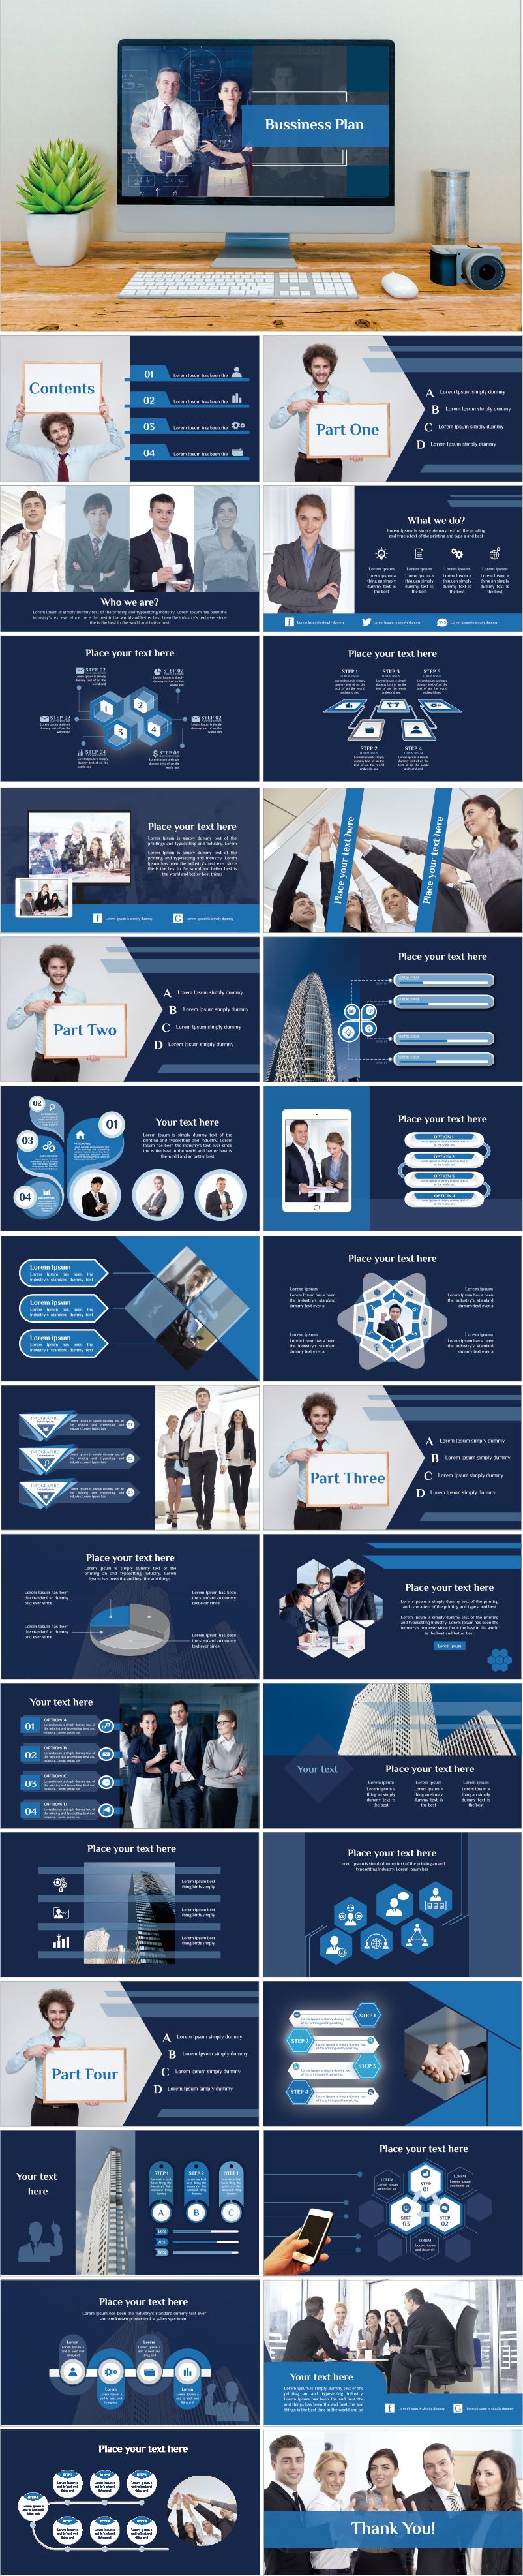 PowerPoint template vol.27